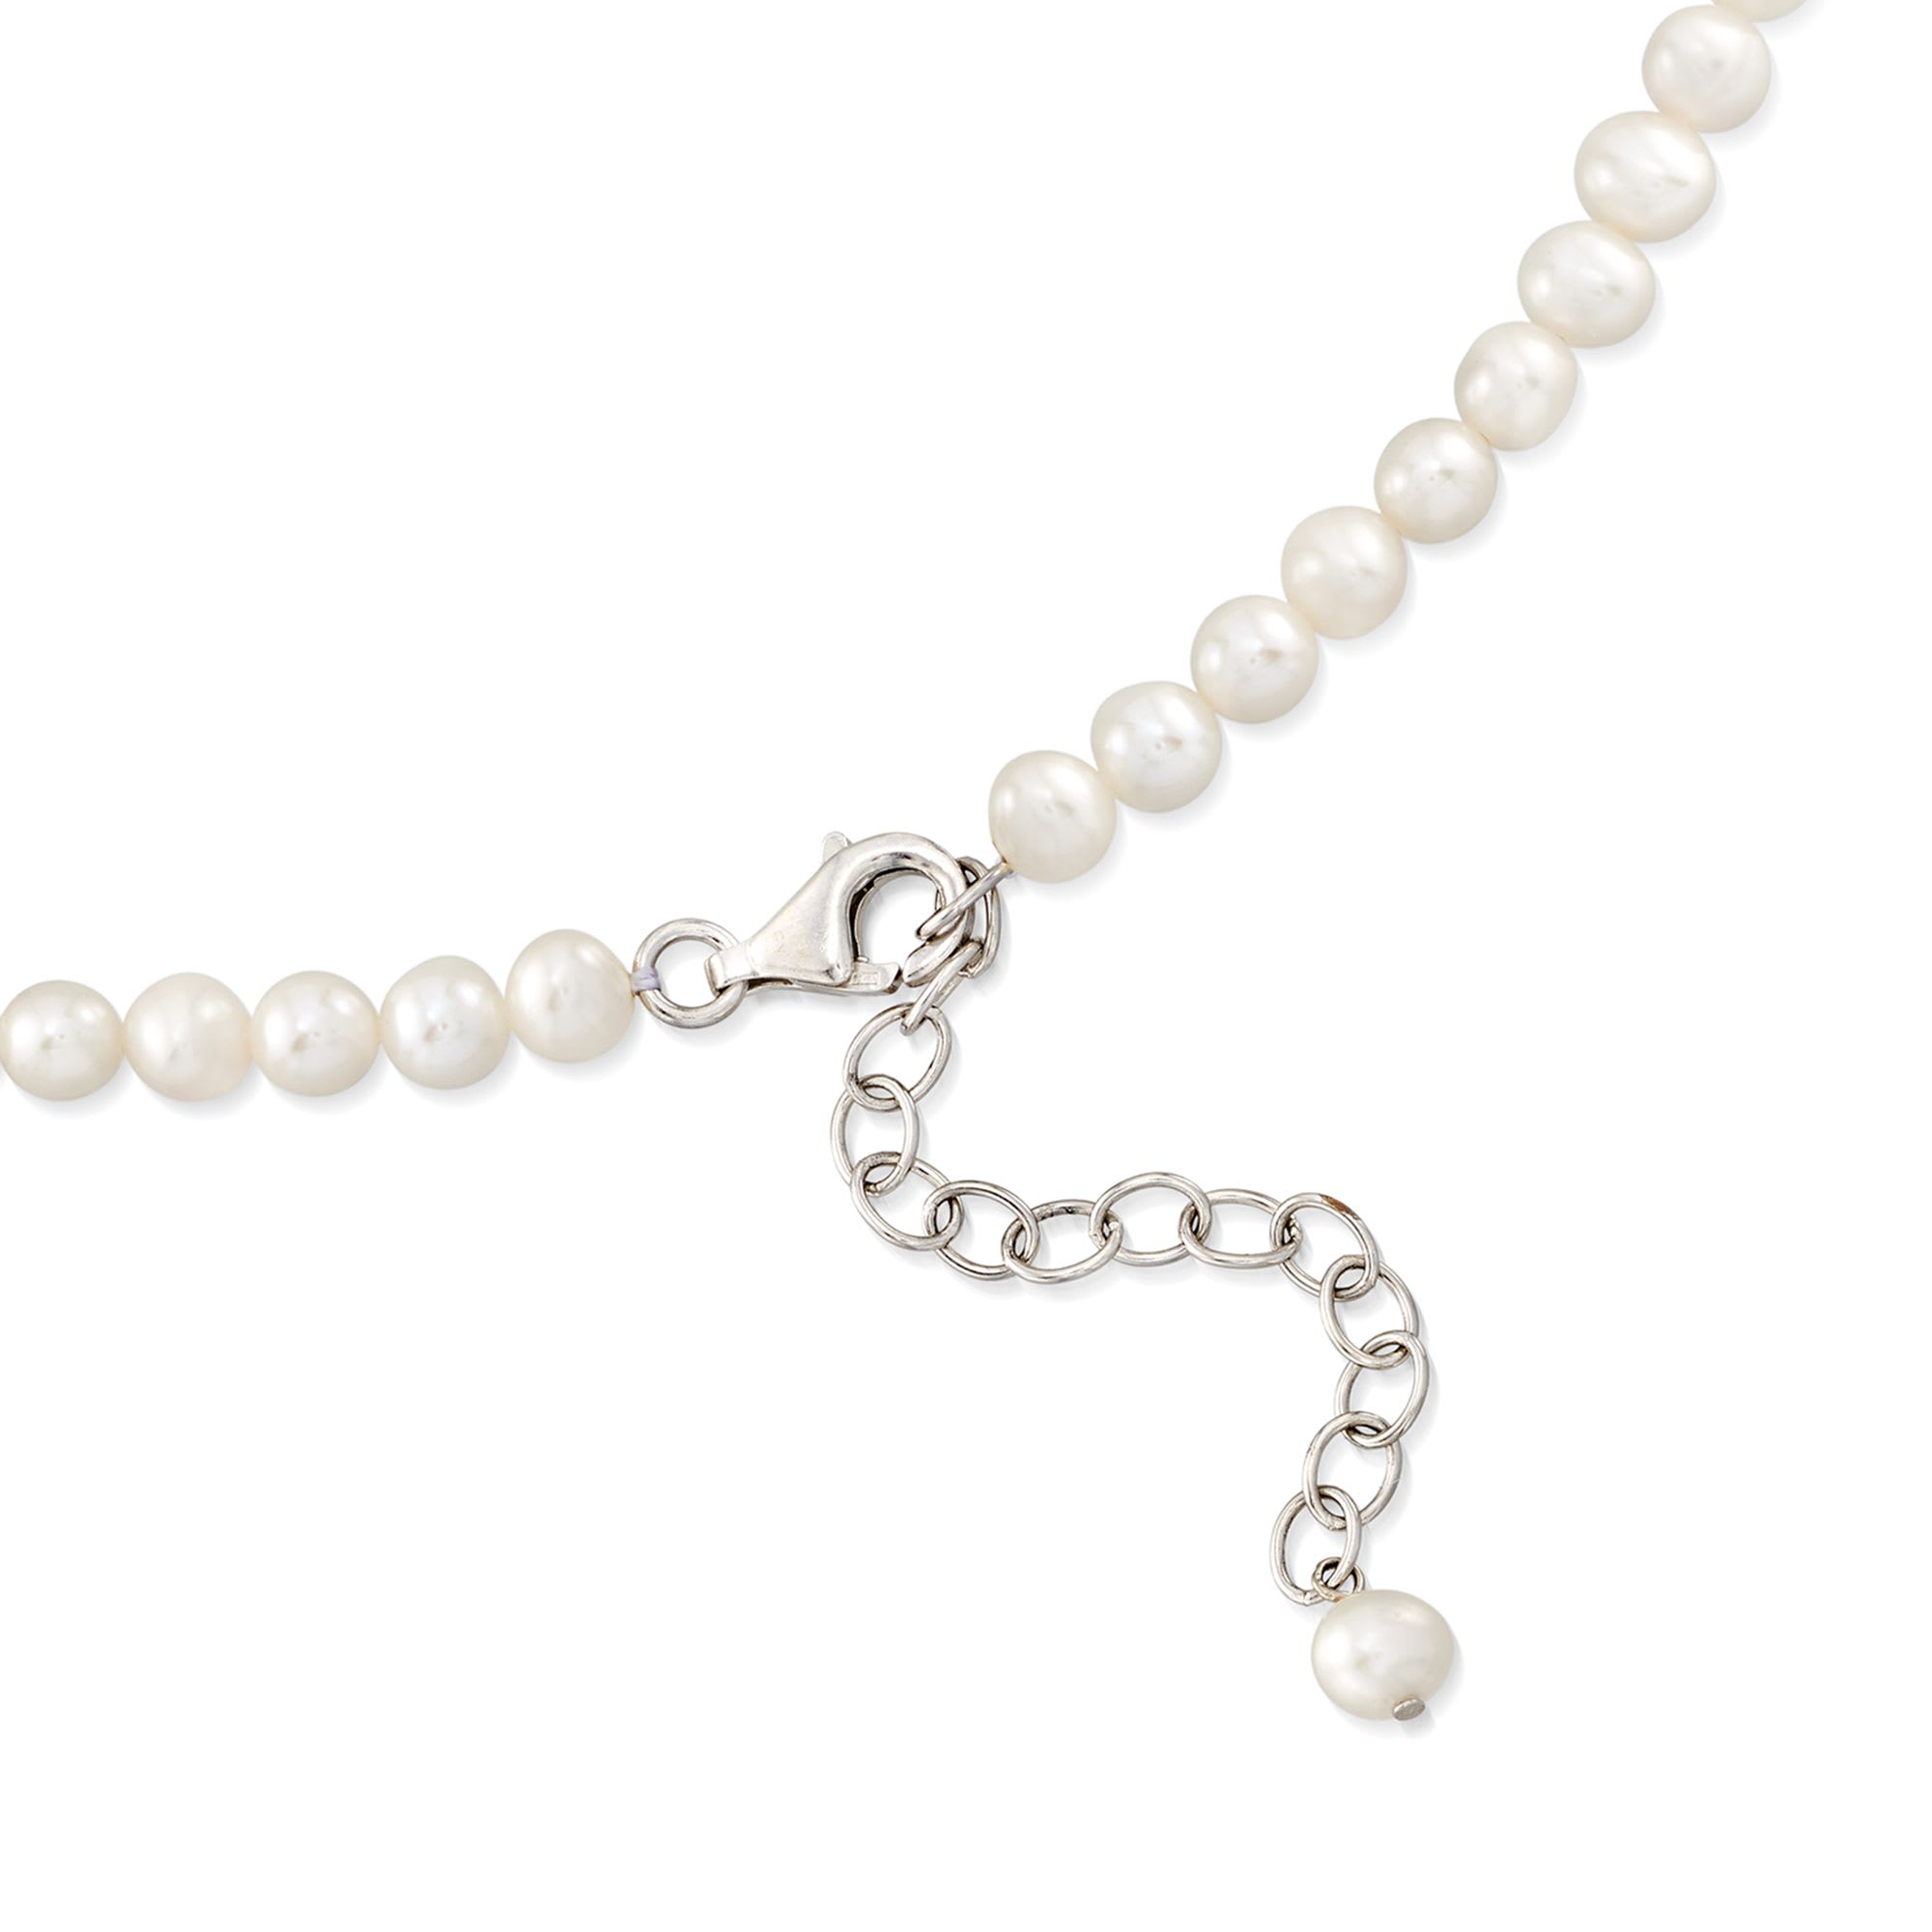 Ross-Simons - 7-8mm Cultured Pearl Necklace, Silver Magnetic Clasp. 24